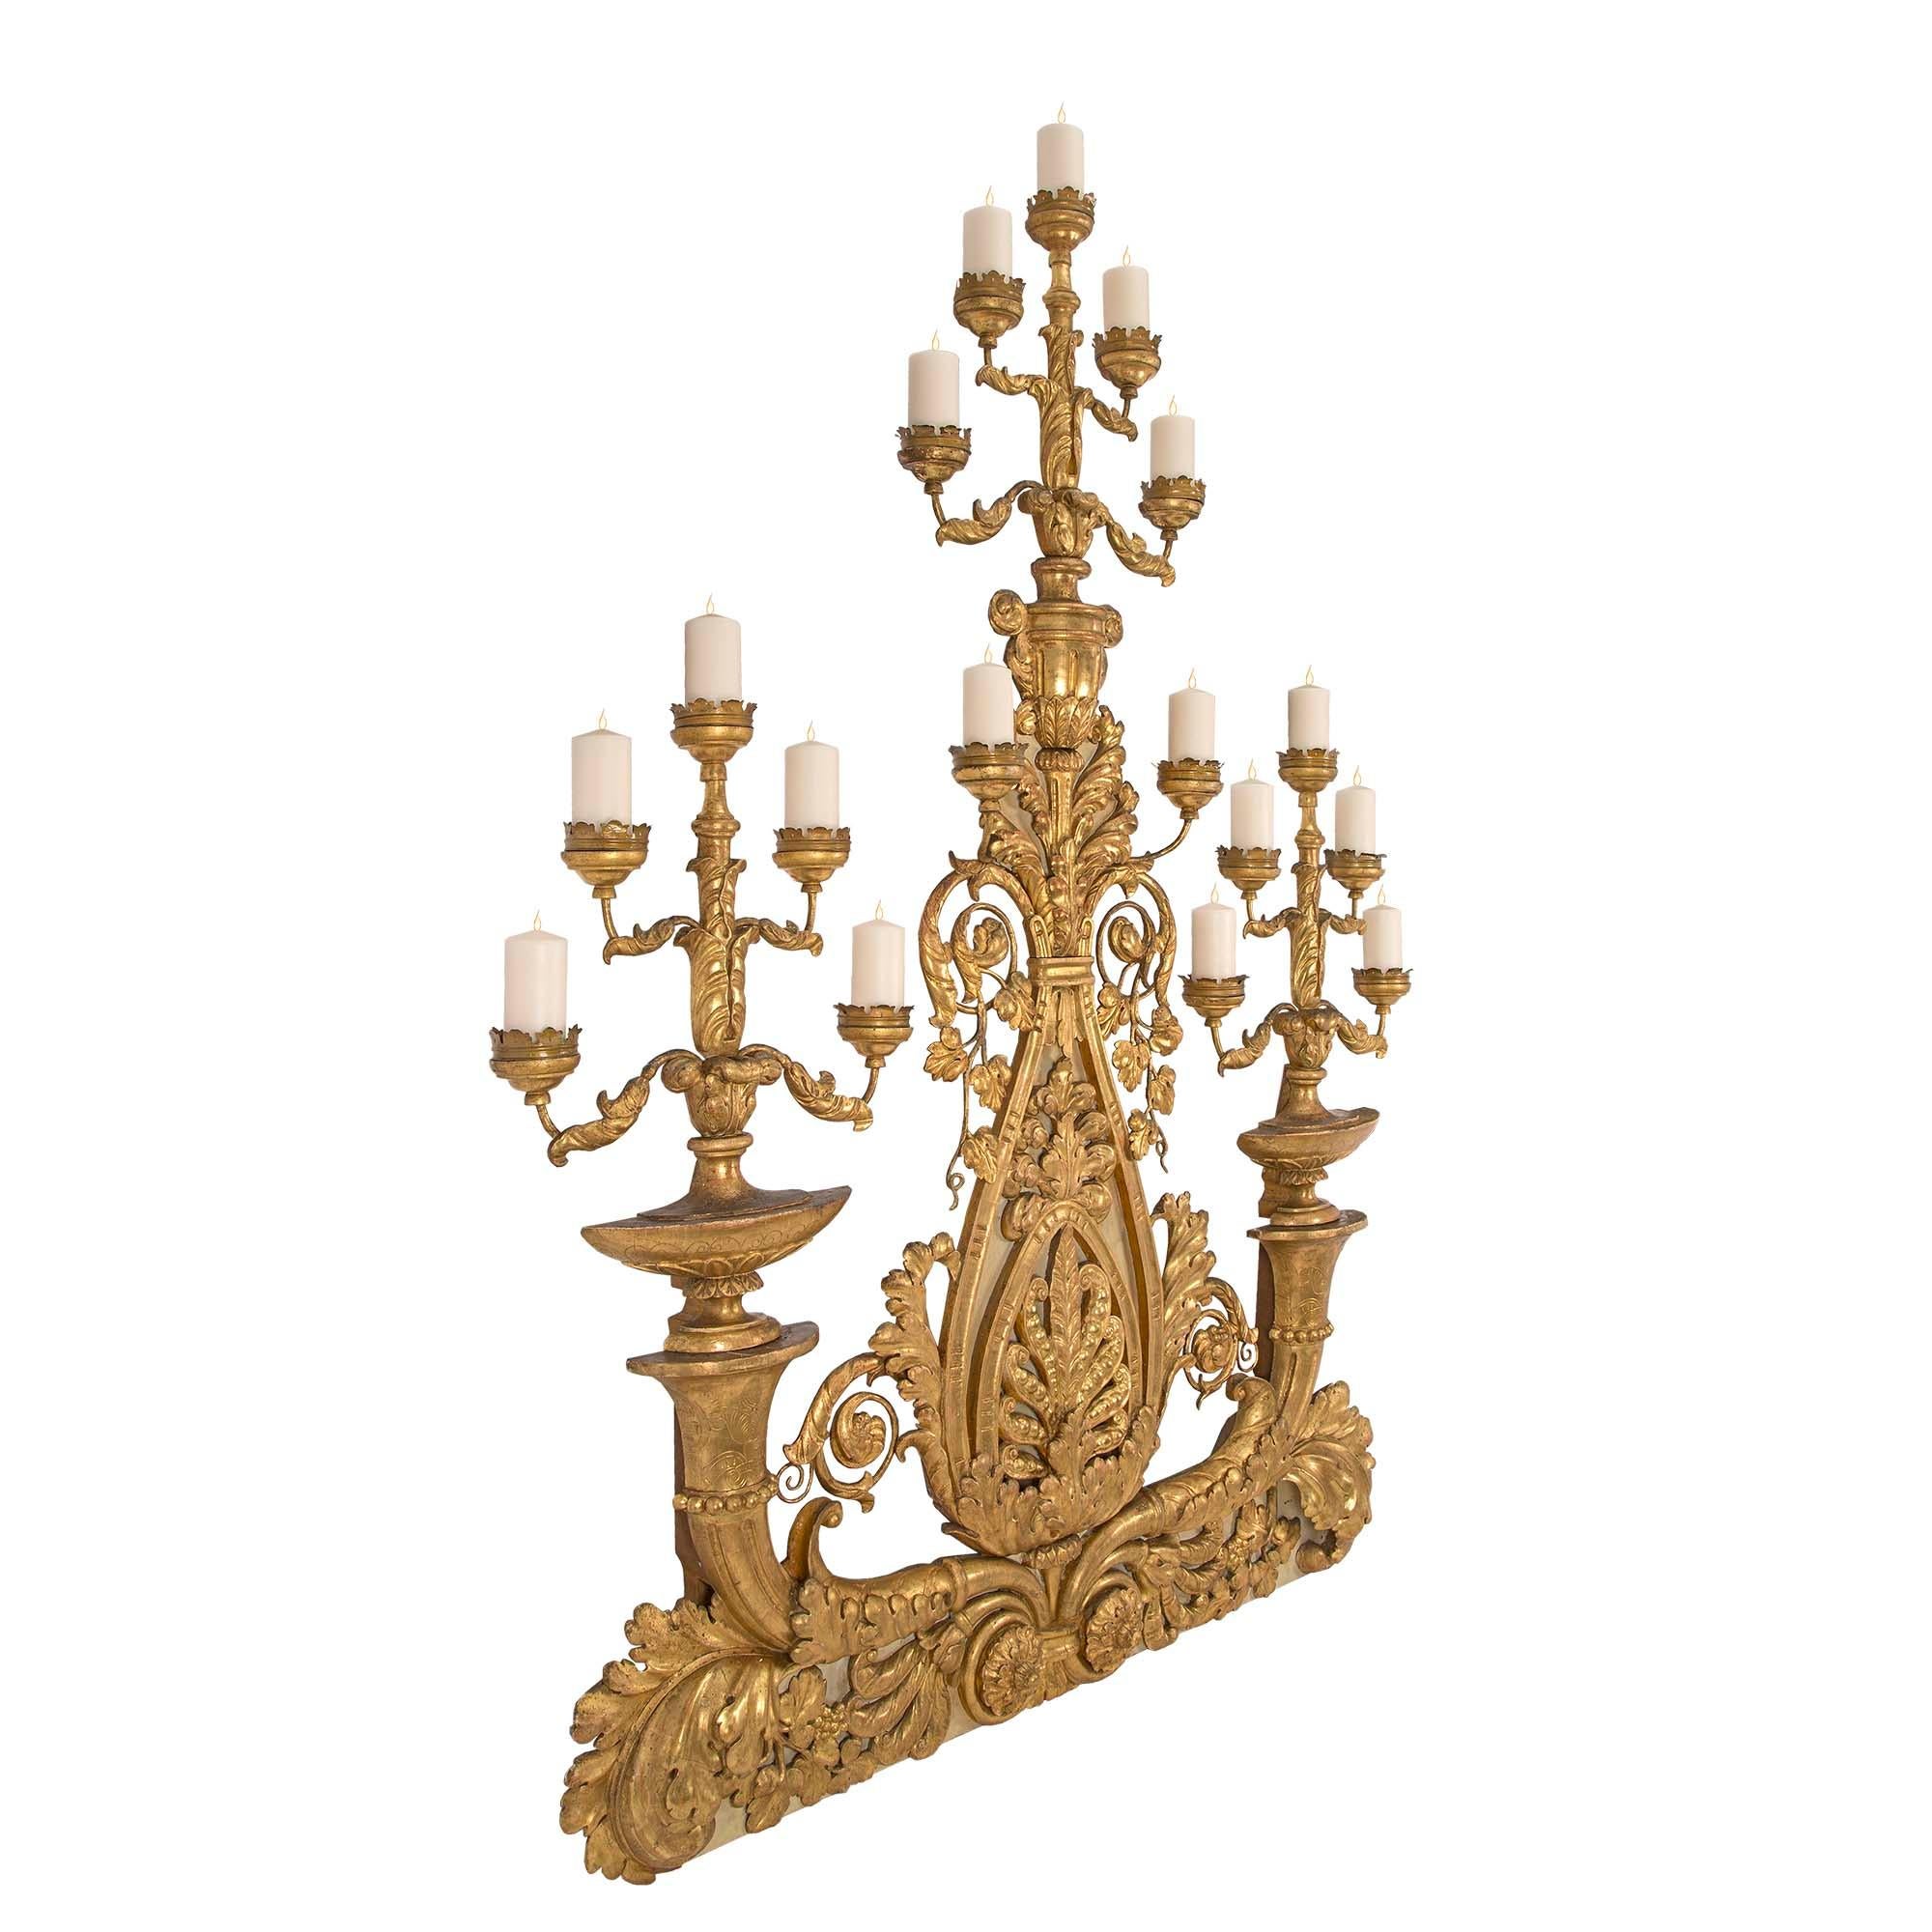 Italian 18th Century Monumental Giltwood and Gilt Metal Tuscan Candelabras In Good Condition For Sale In West Palm Beach, FL